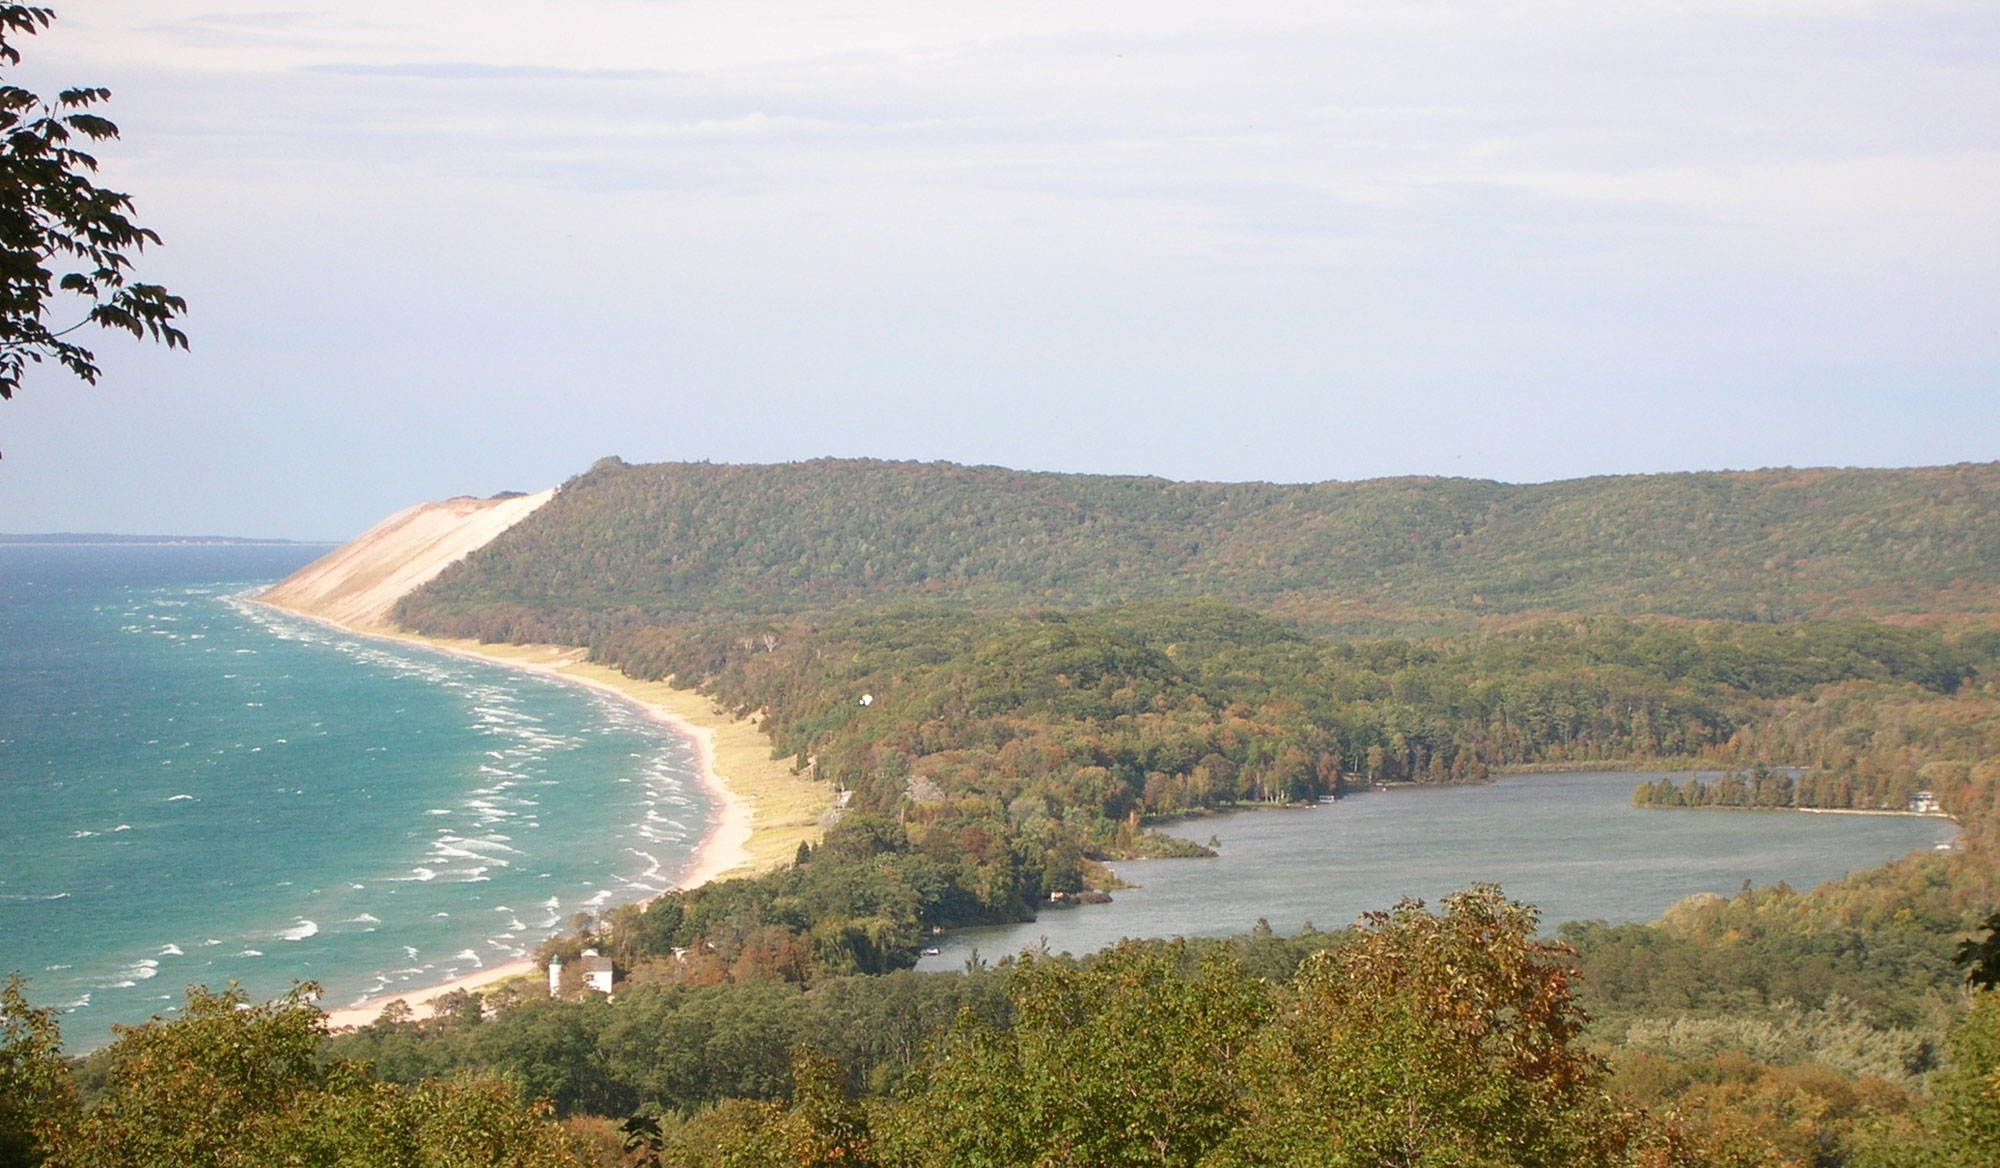 Photograph of Empire Bluff in Sleeping Bear Dunes National Lakeshore. The photo shows the arching shoreline of Lake Michigan at left, with a sandy bluff rising above the lake in the distance. To the right is a forested landscape with a large lake in a low spot.